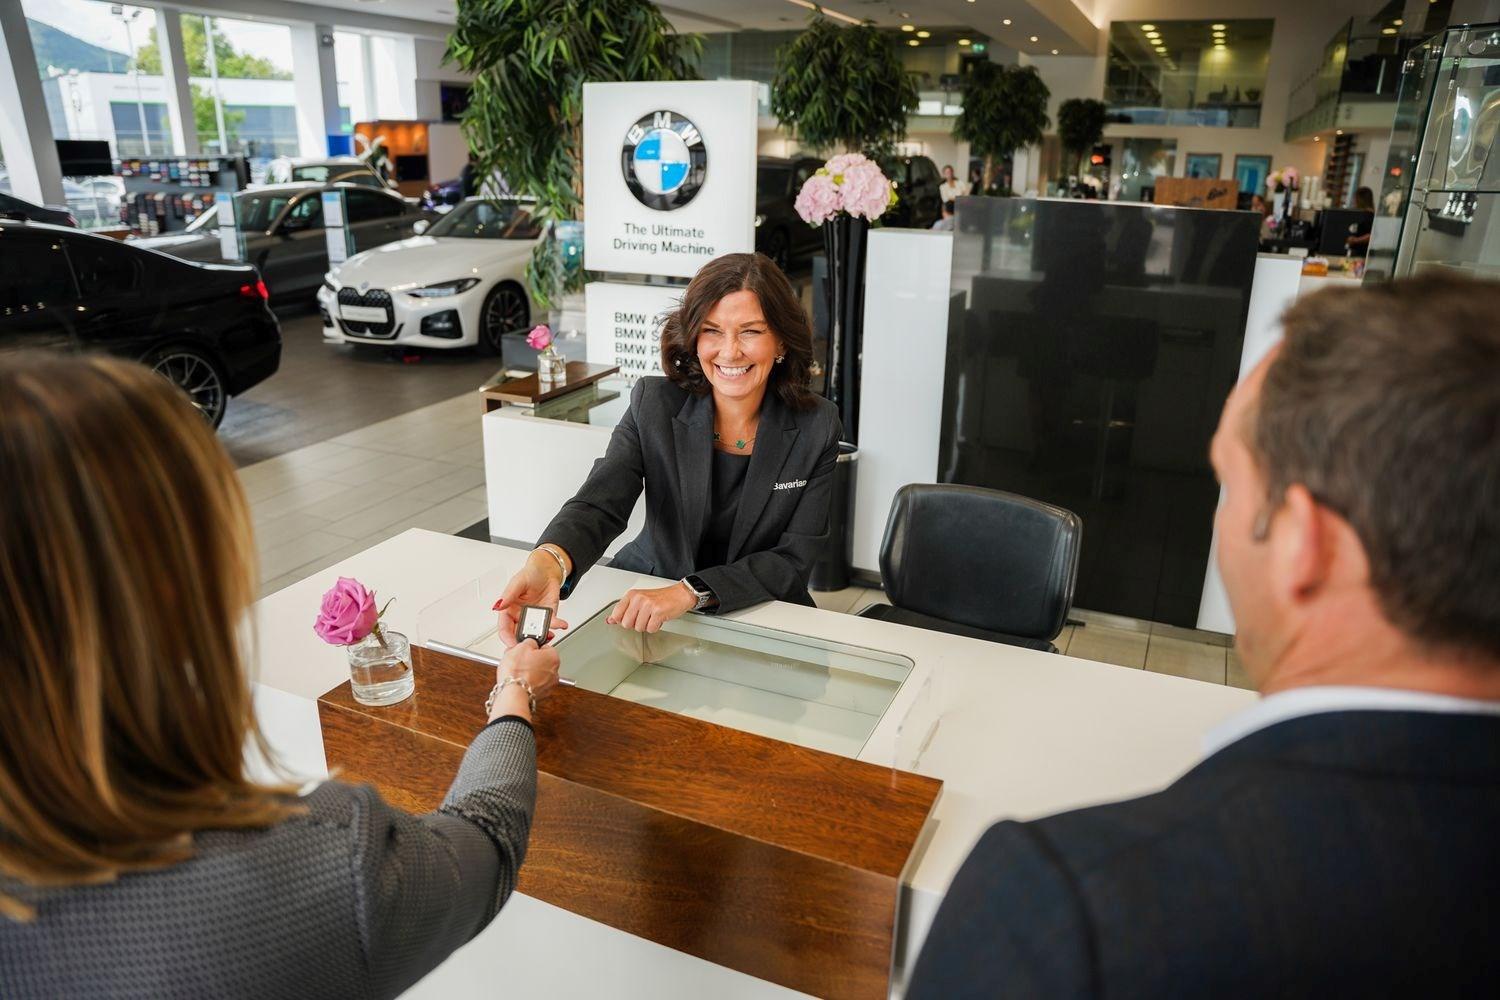 BMW Sales Specialist smiles as they hand over new car keys to customers who have just bought a new BMW vehicle at the Bavarian BMW Belfast showroom